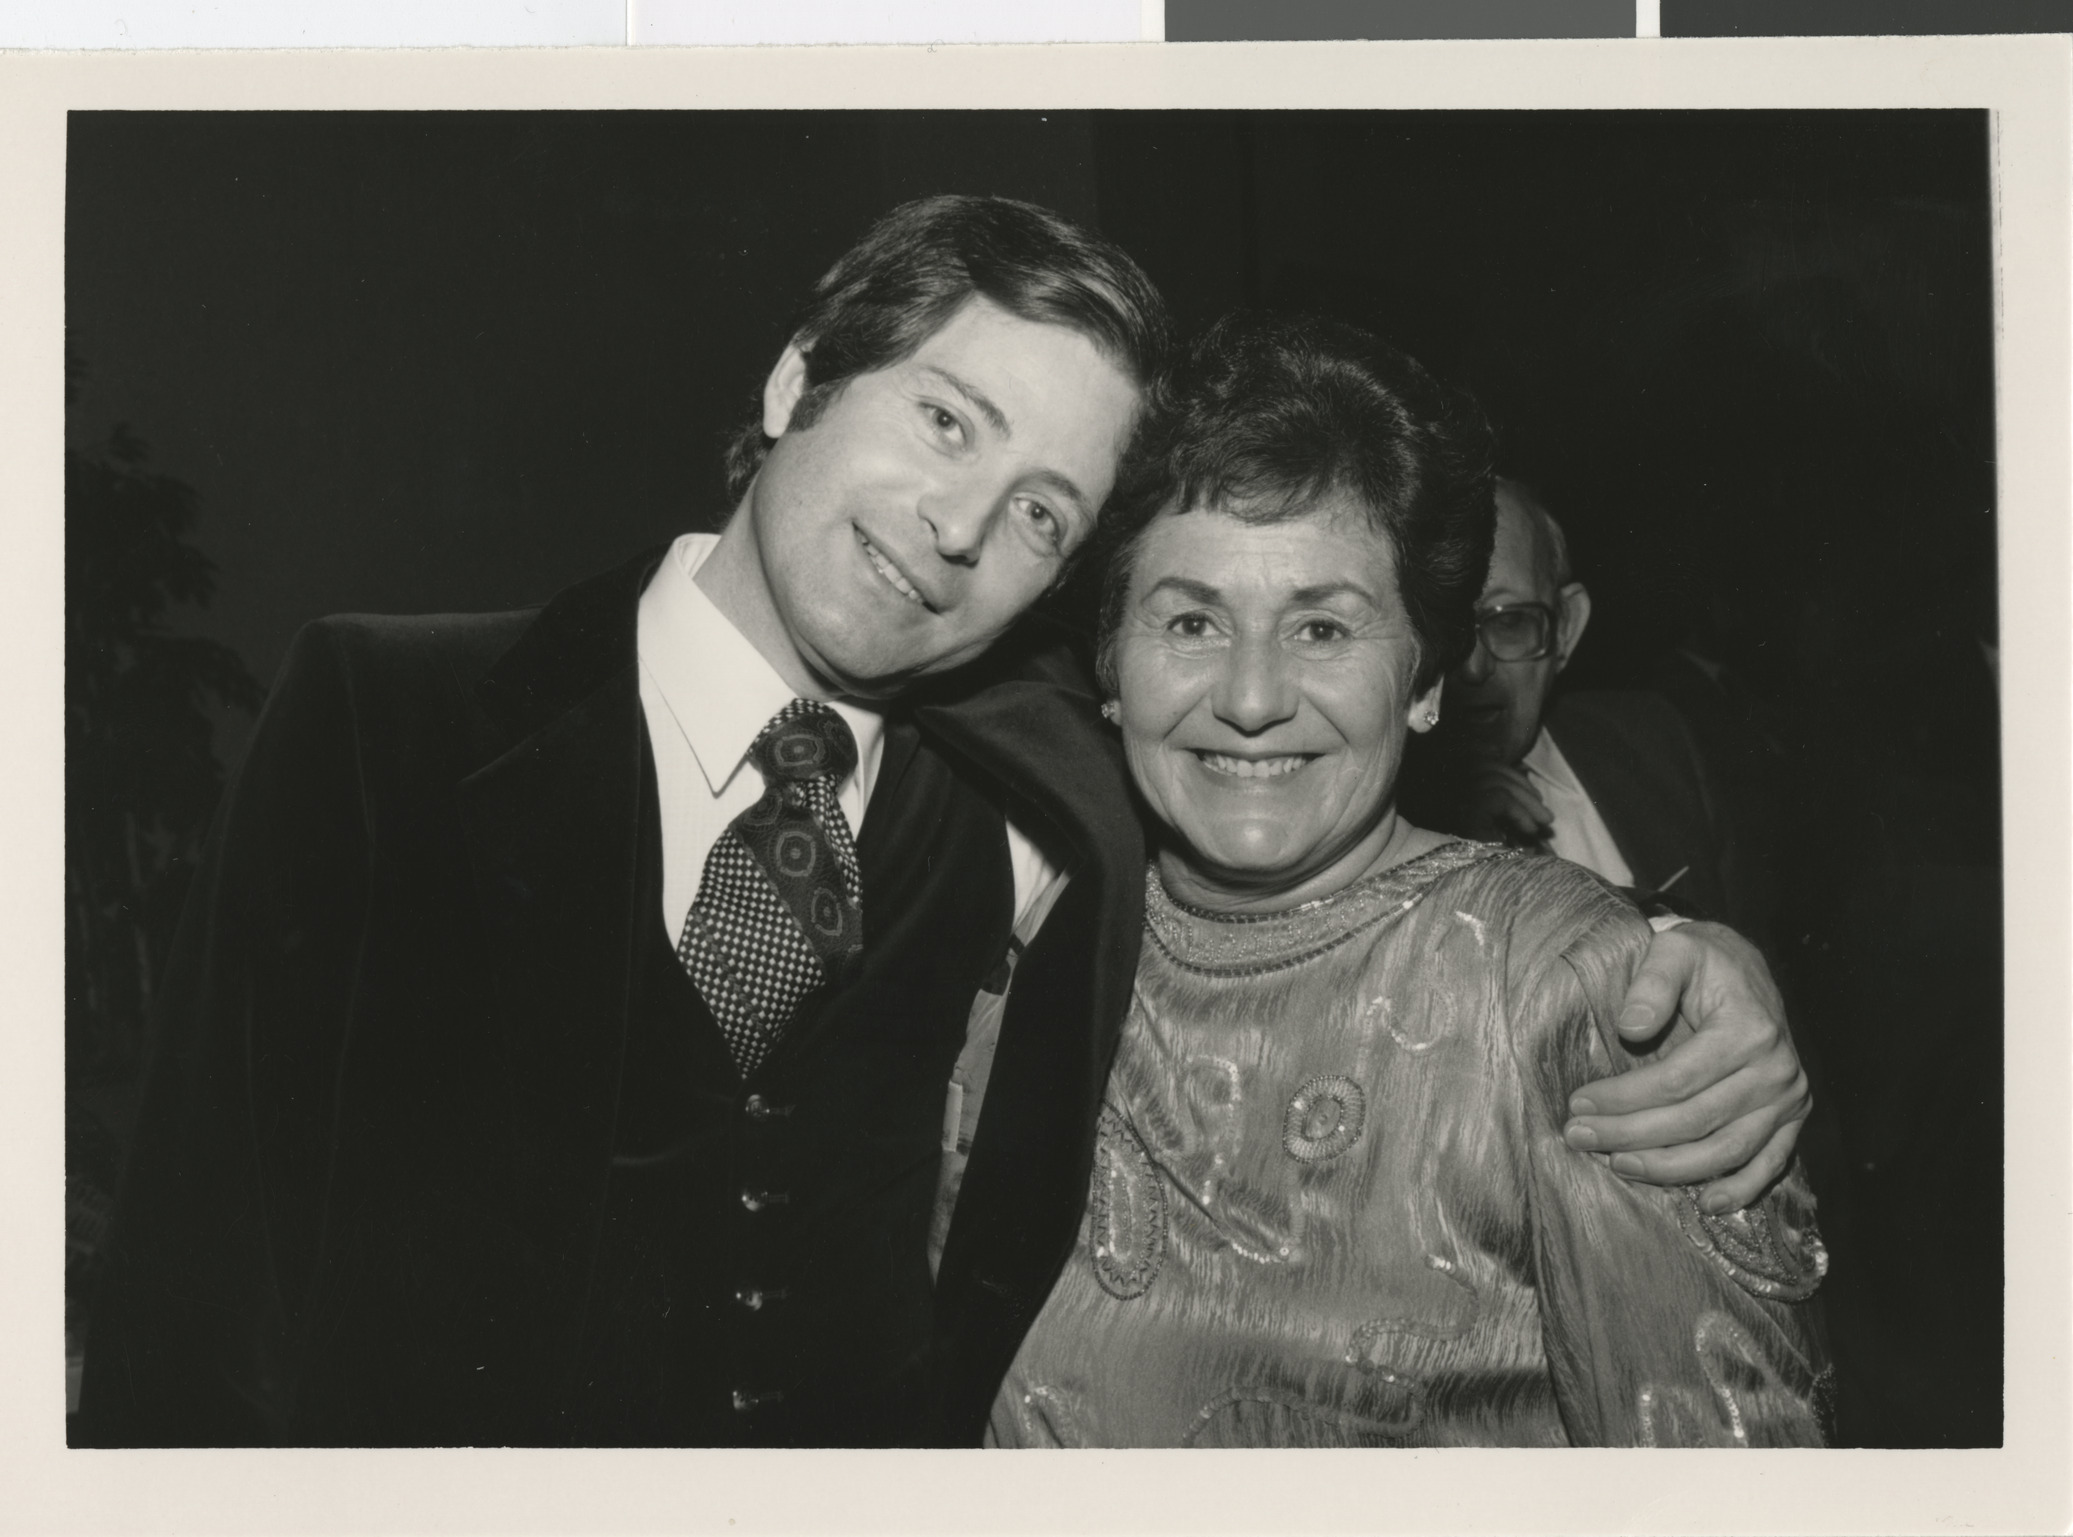 Photograph of Mike Tell and Faye Steinberg, 1980s